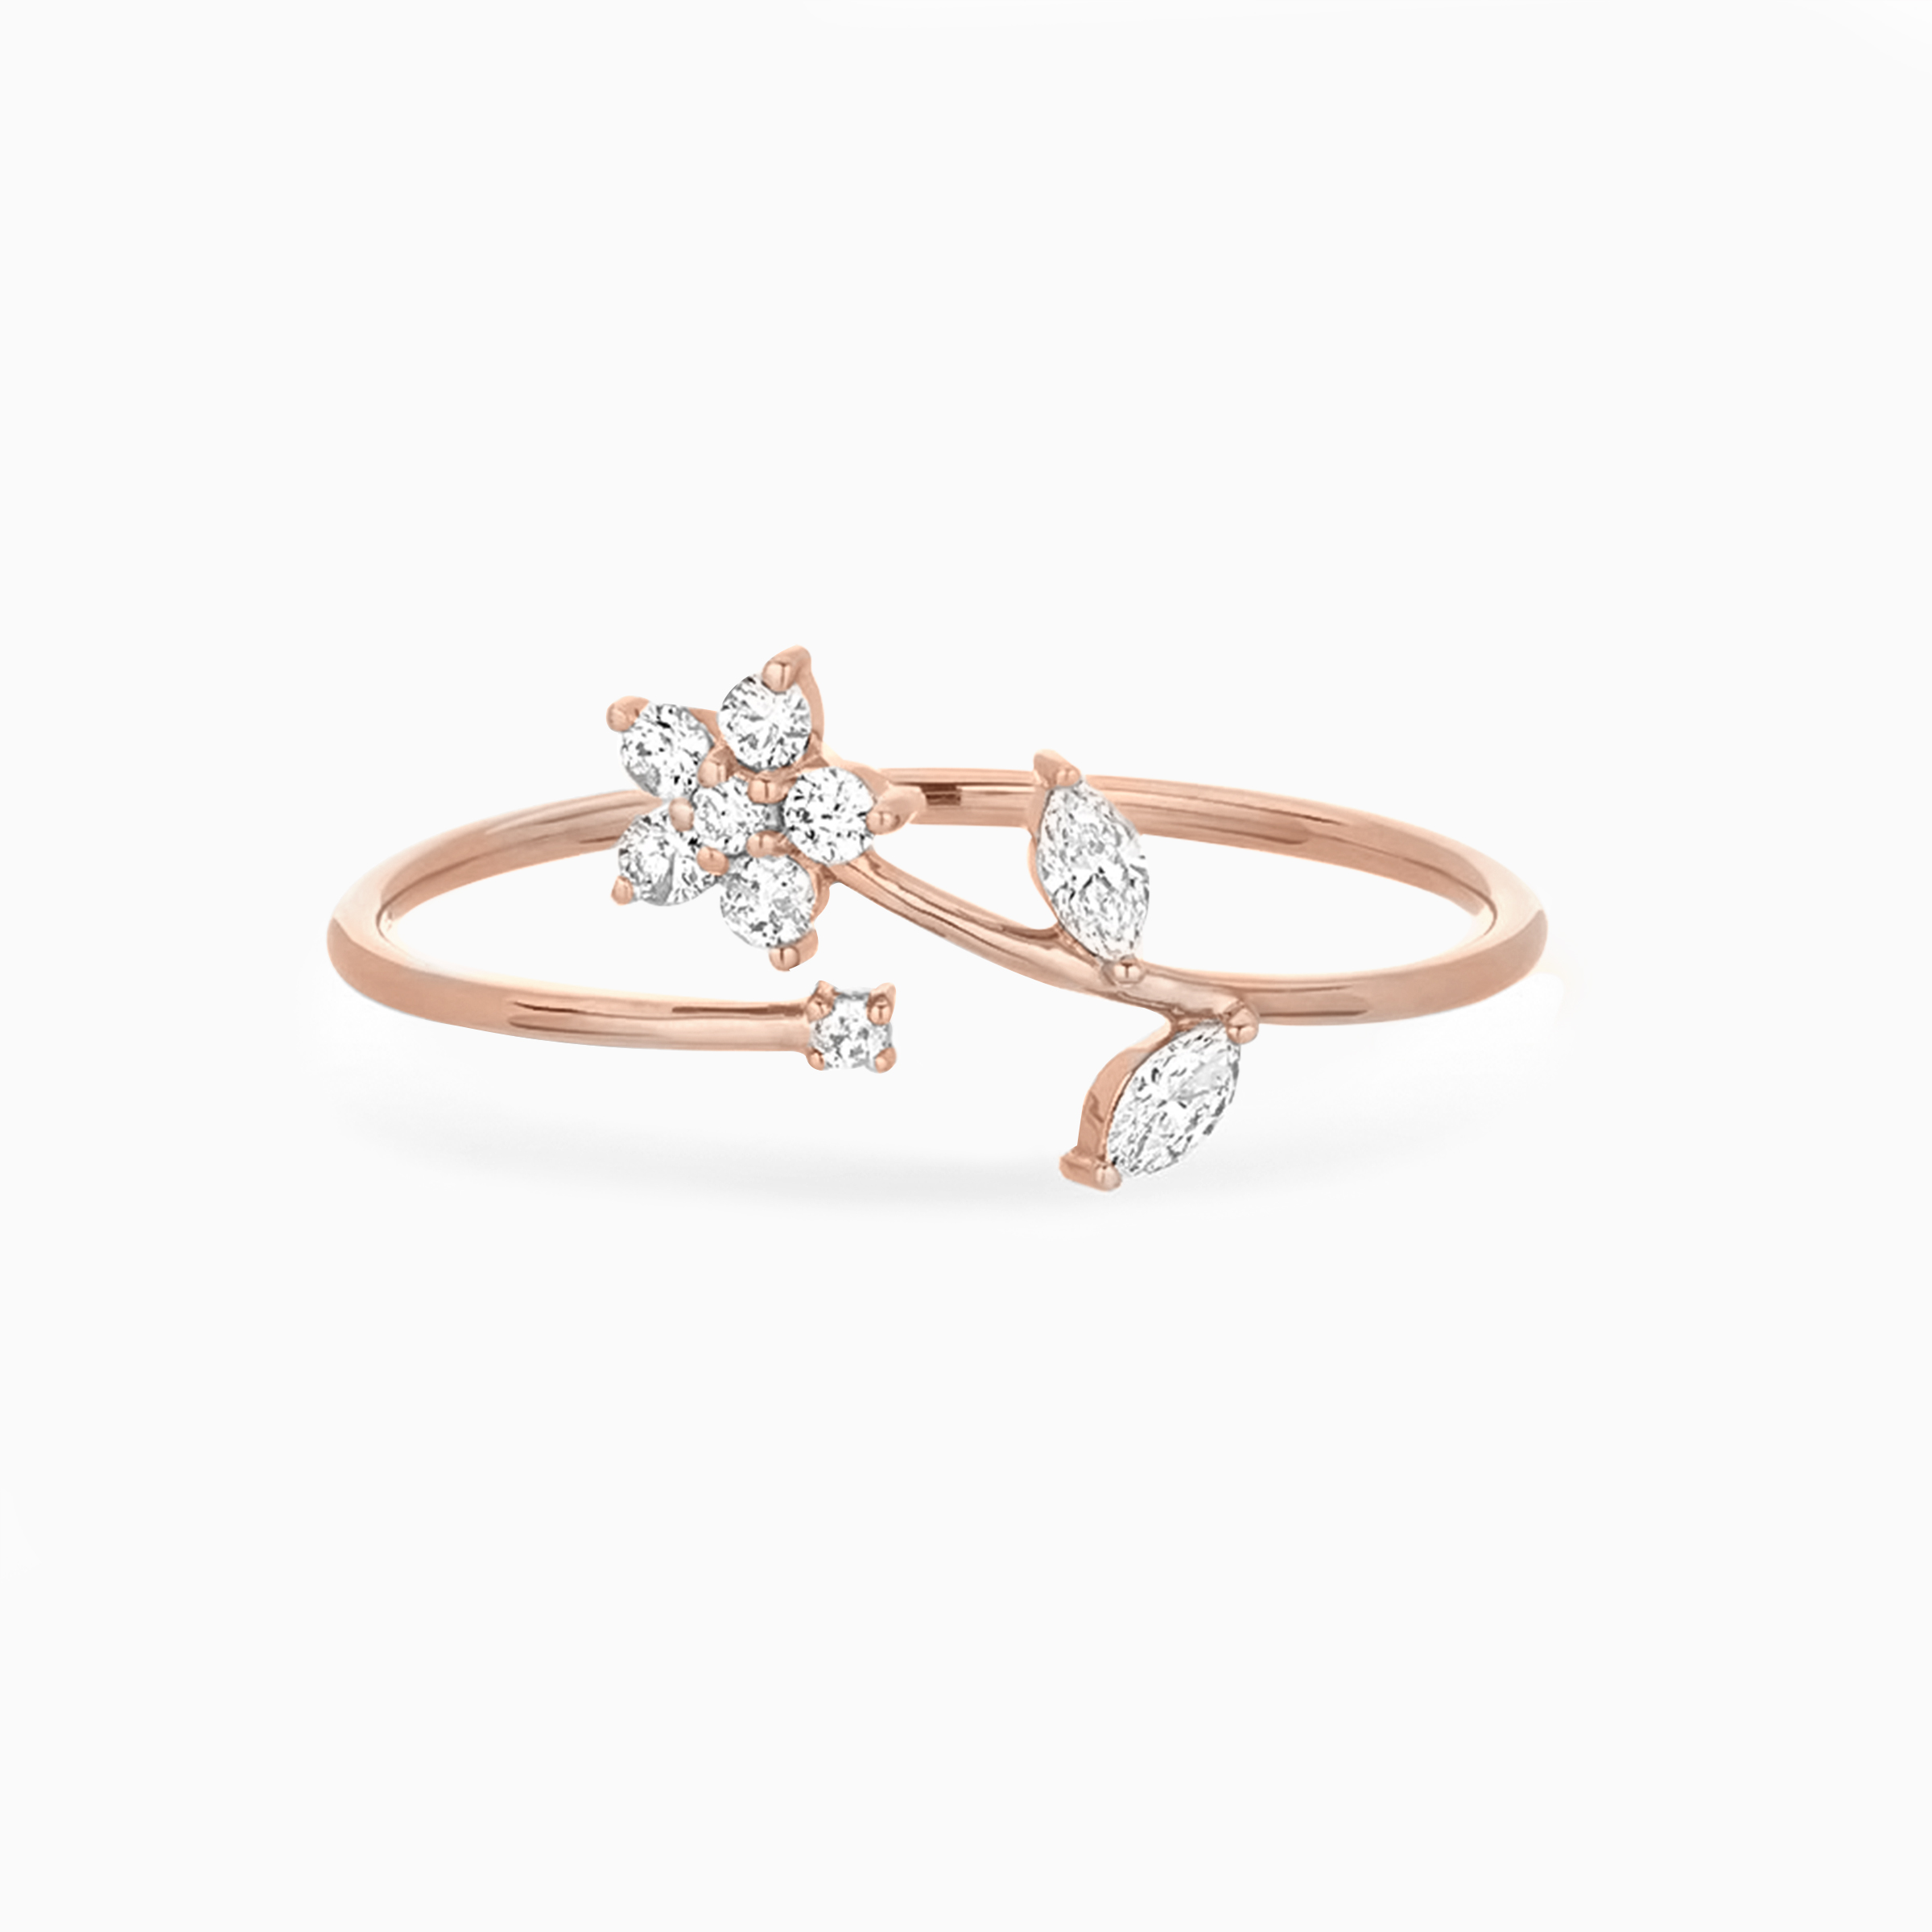 Darry Ring unique promise ring in rose gold